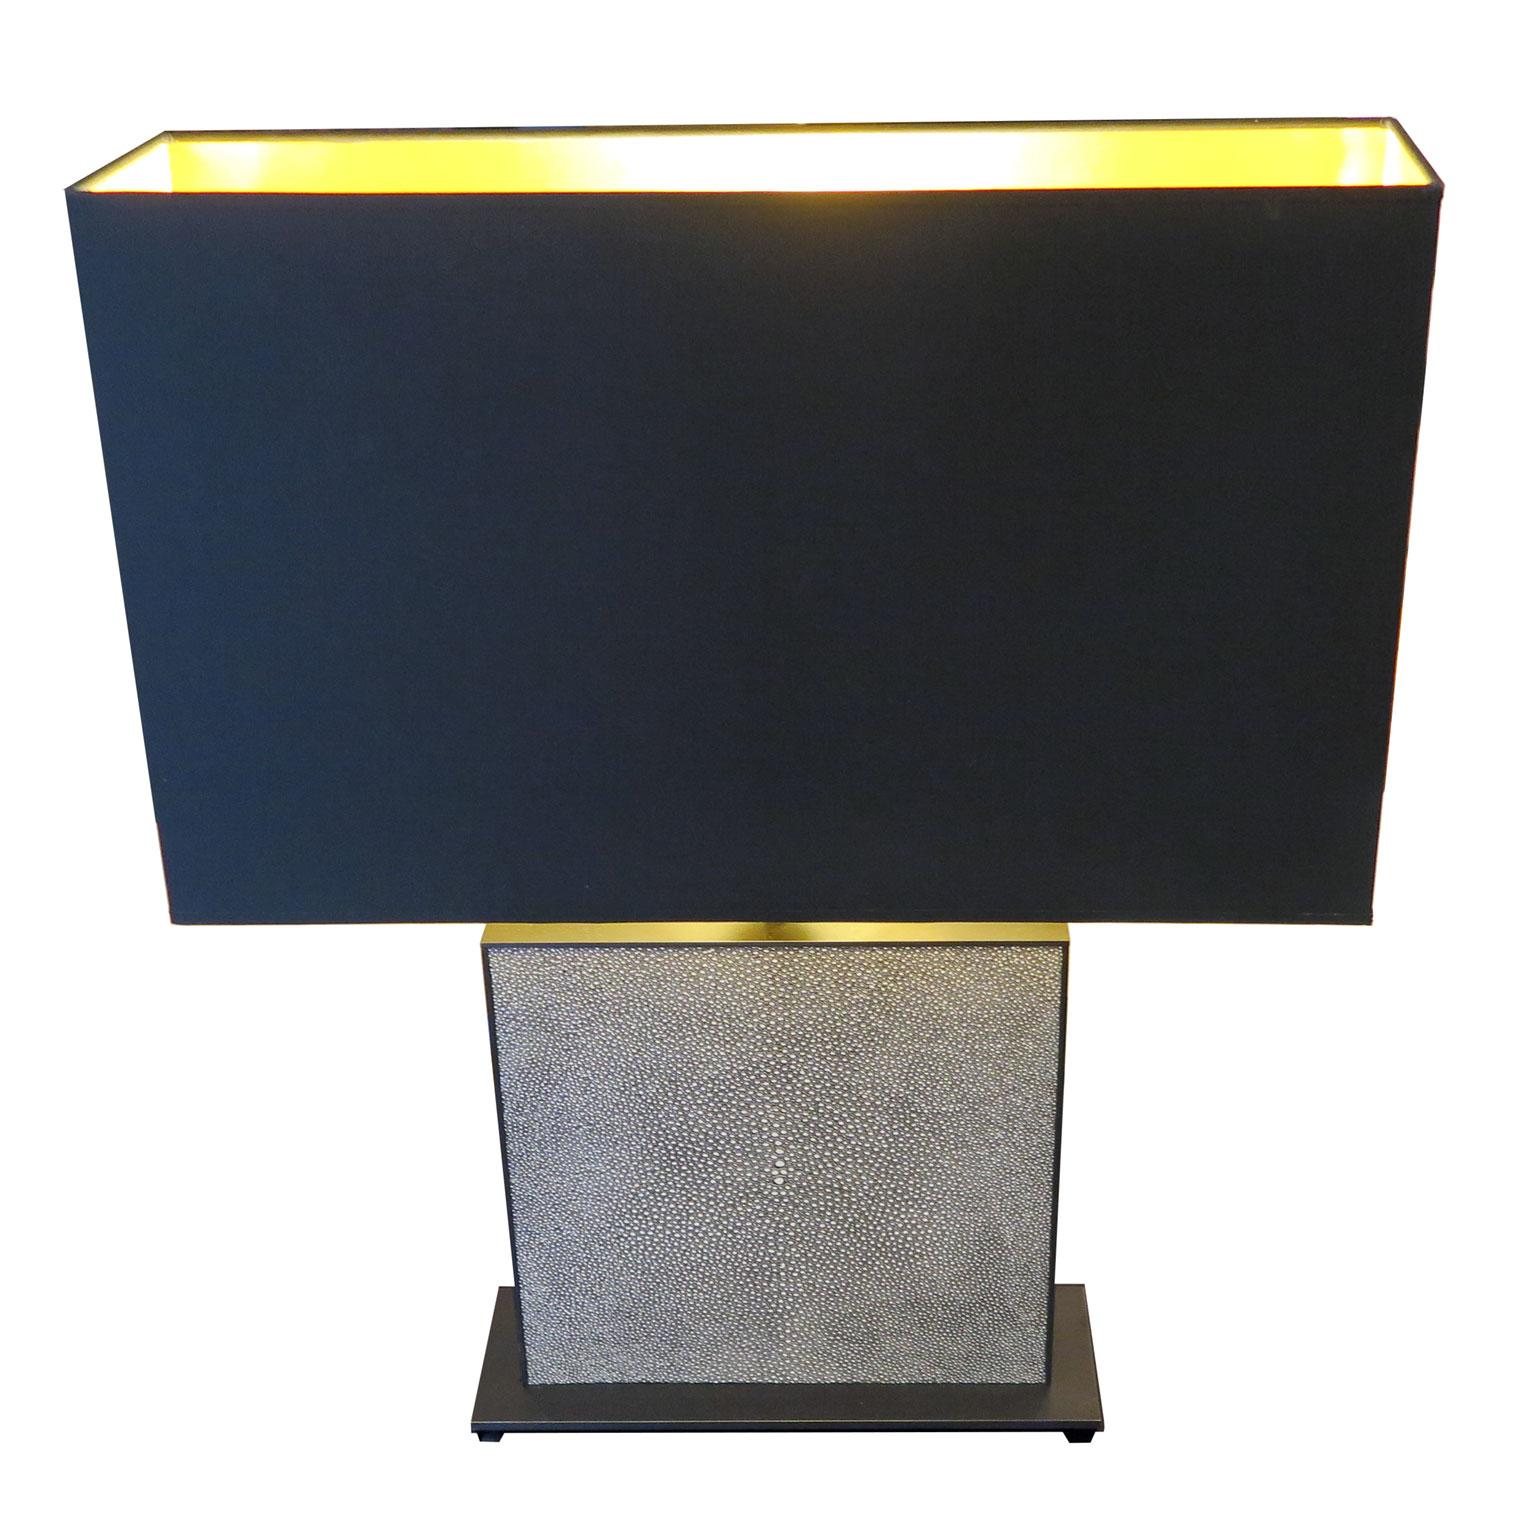 Pair of table lamps with narrow base in brass in oil rubbed bronze coloration. The shades are black and lined with a metallic gold interior emitting a gold light. The shades match the narrow design of the base. Faux embossed shagreen panels line the